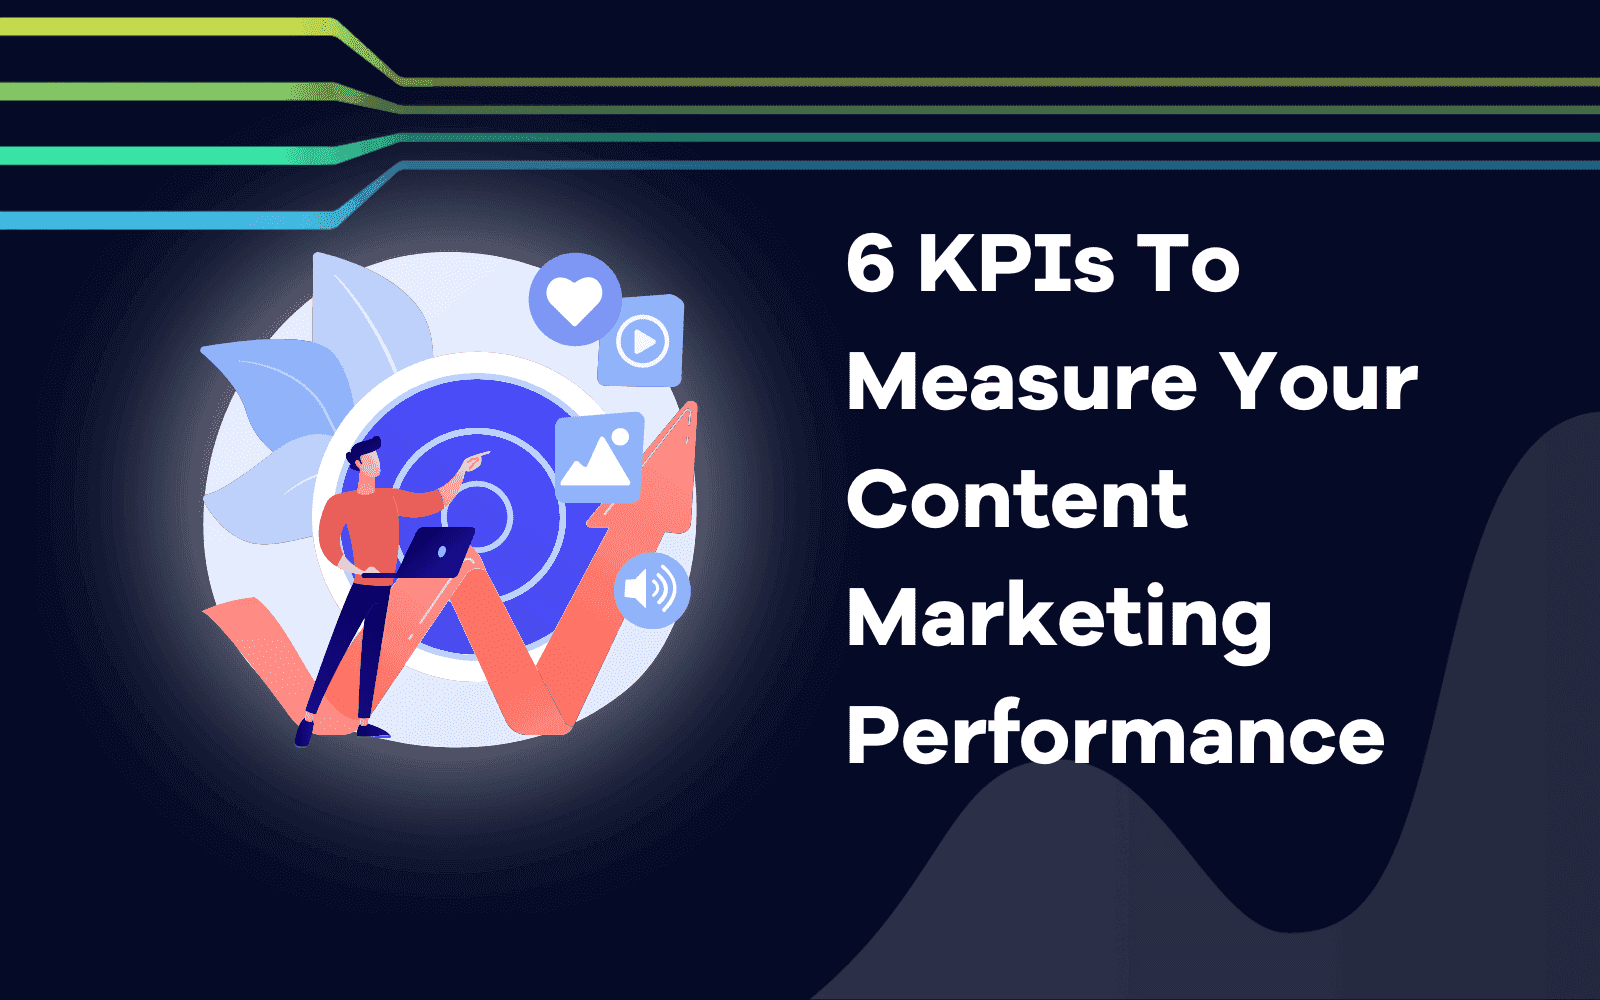 KPIs To Measure Your Content Marketing Performance